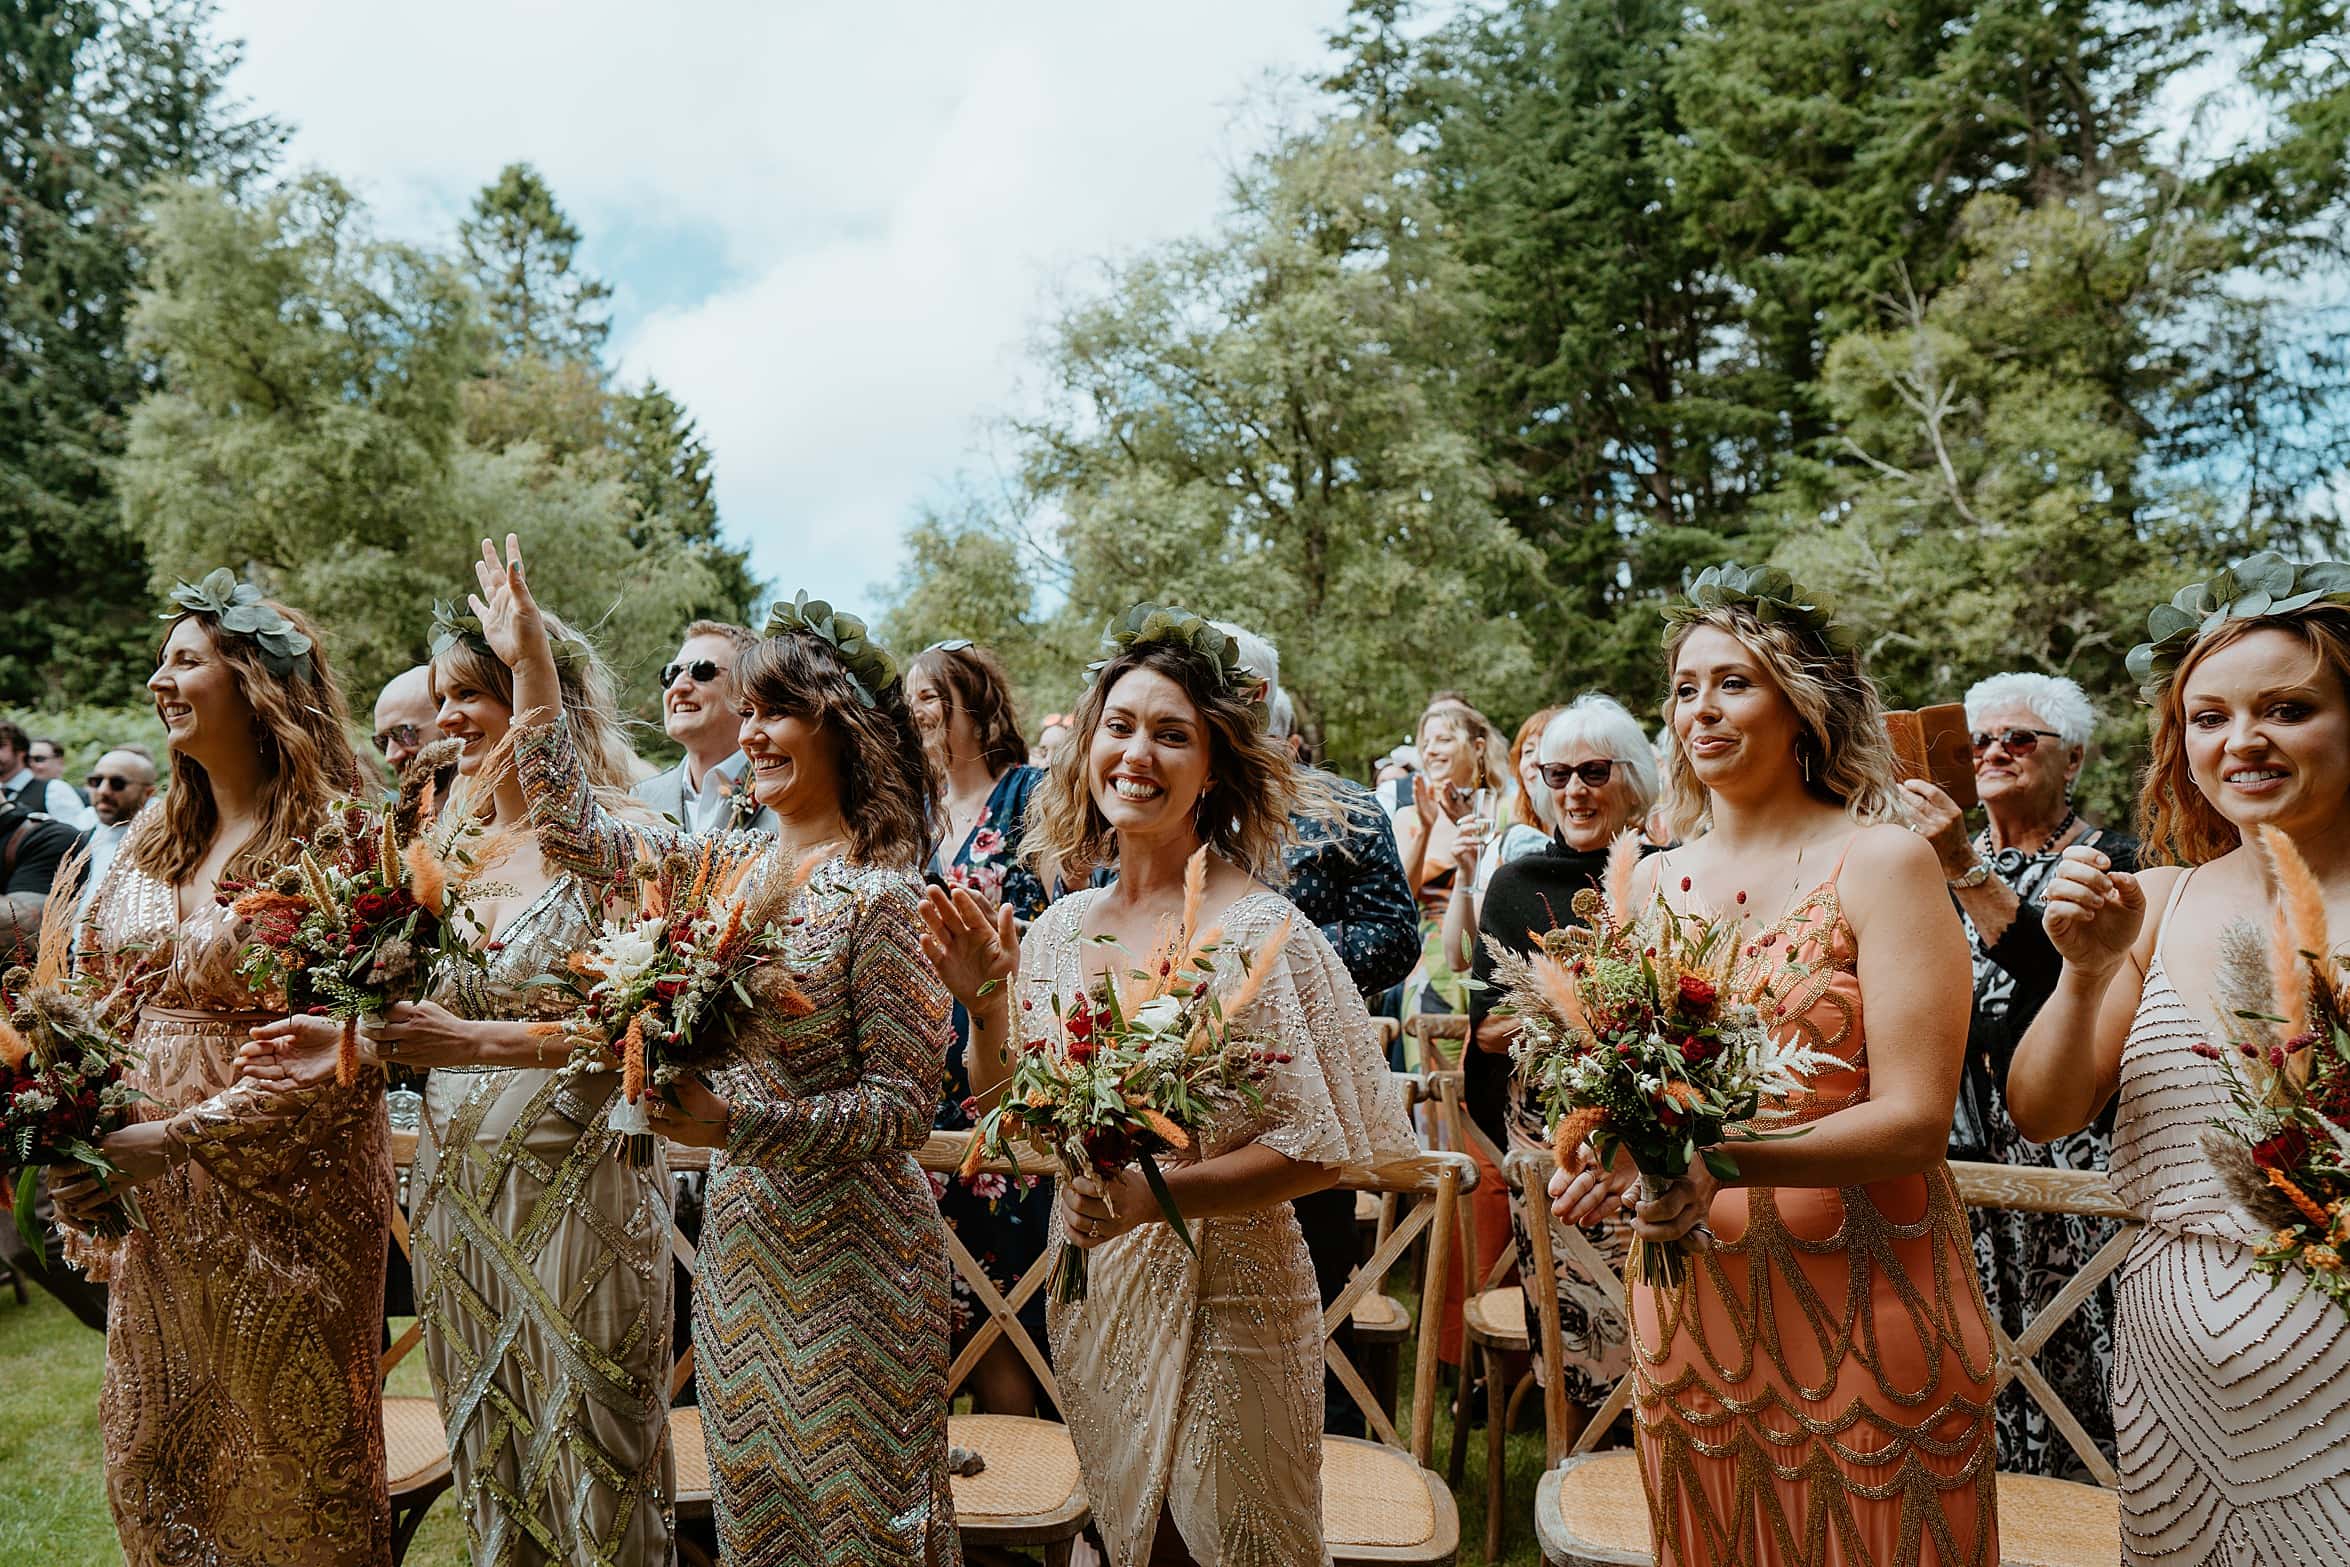 bridesmaids wearing bohemian dresses smiling at outdoor ceremony with trees and blue skies in background cardney steading wedding scotland